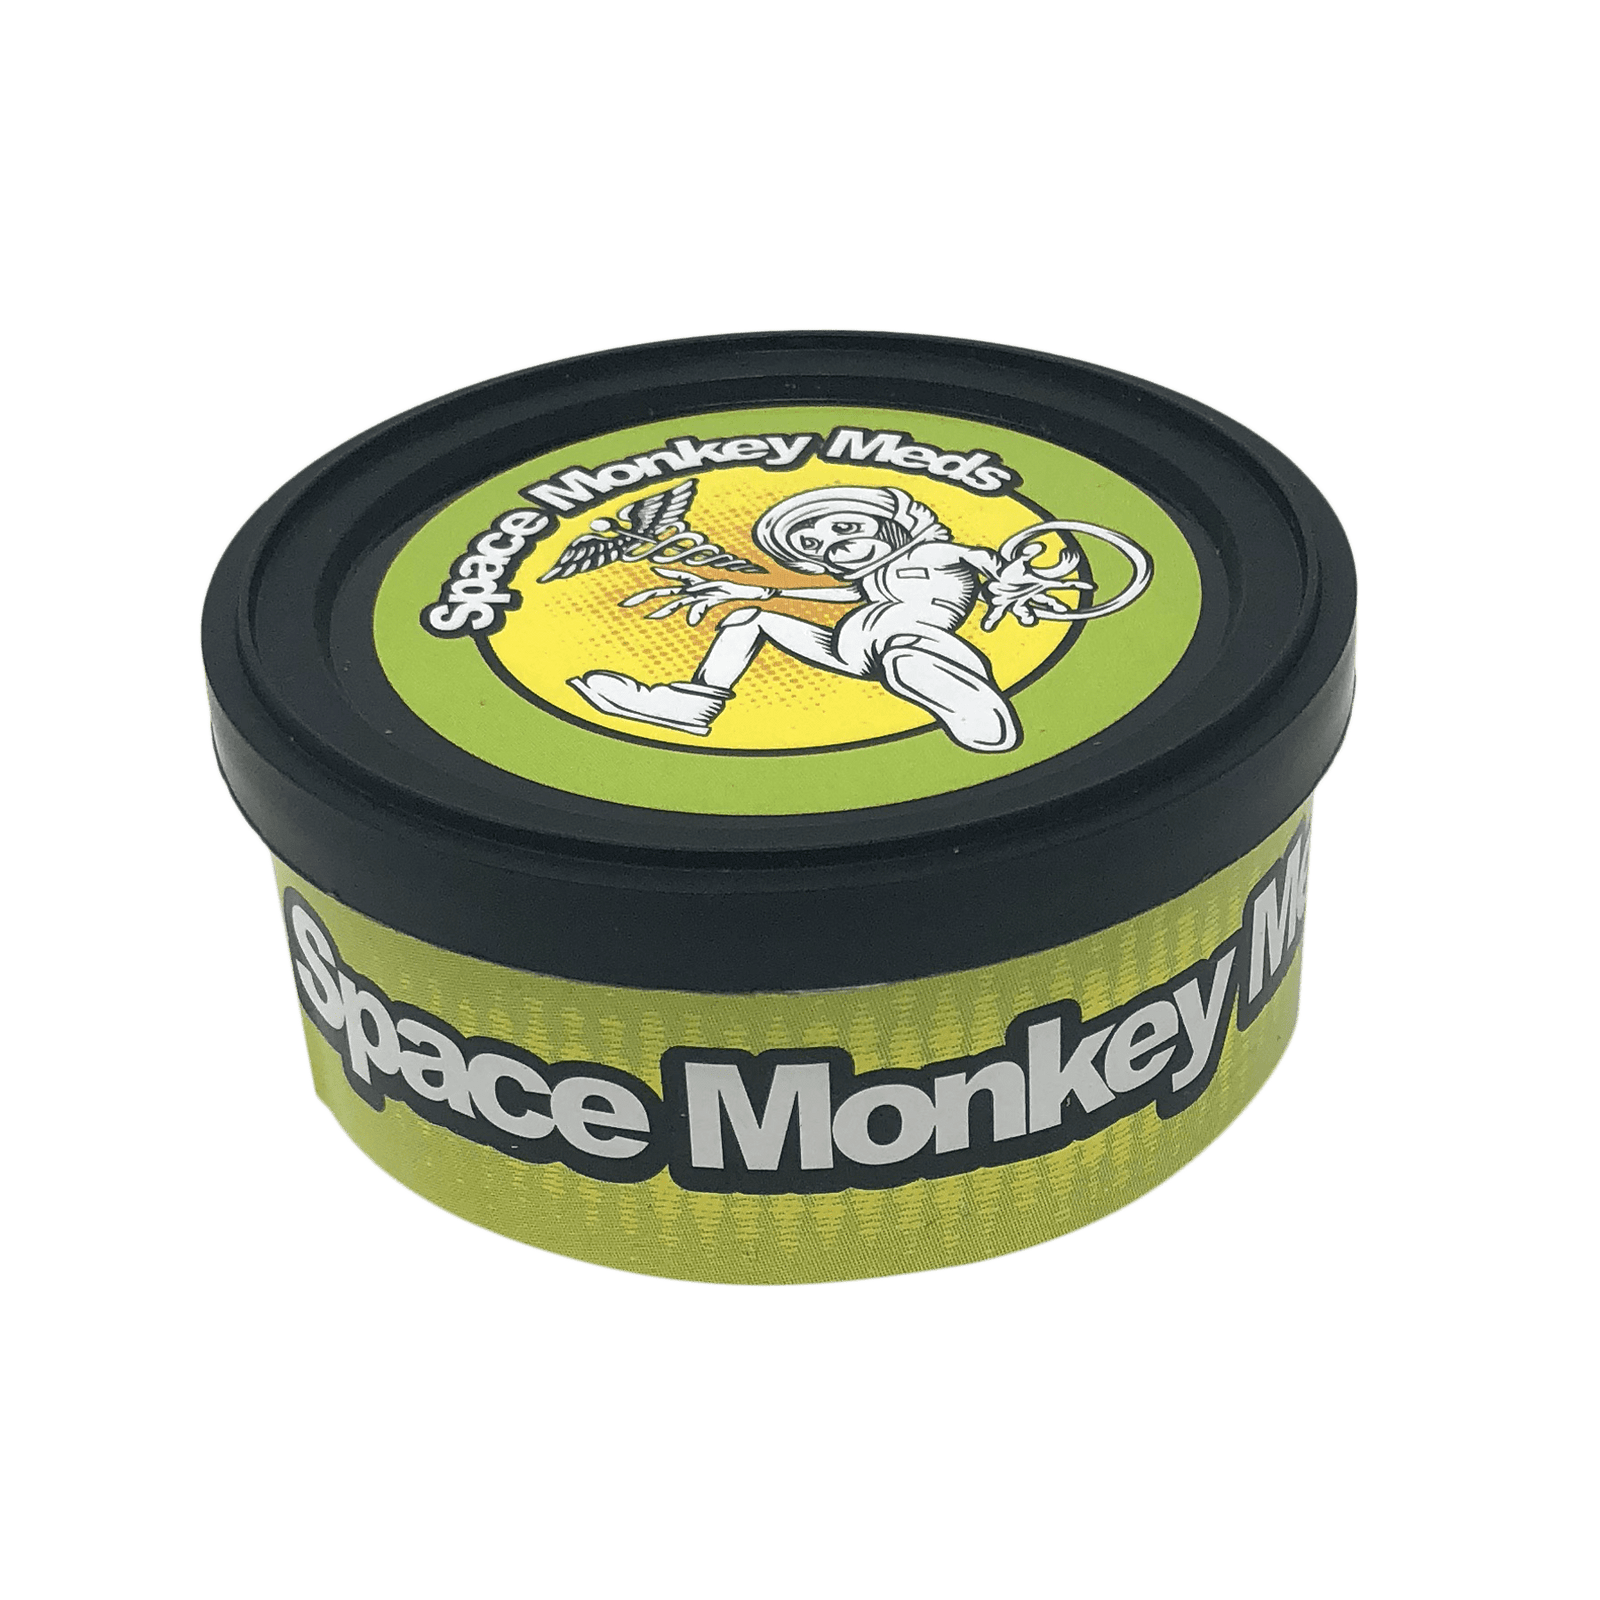 Space Monkey Meds Girl Scout Cookies - The Balloon Room